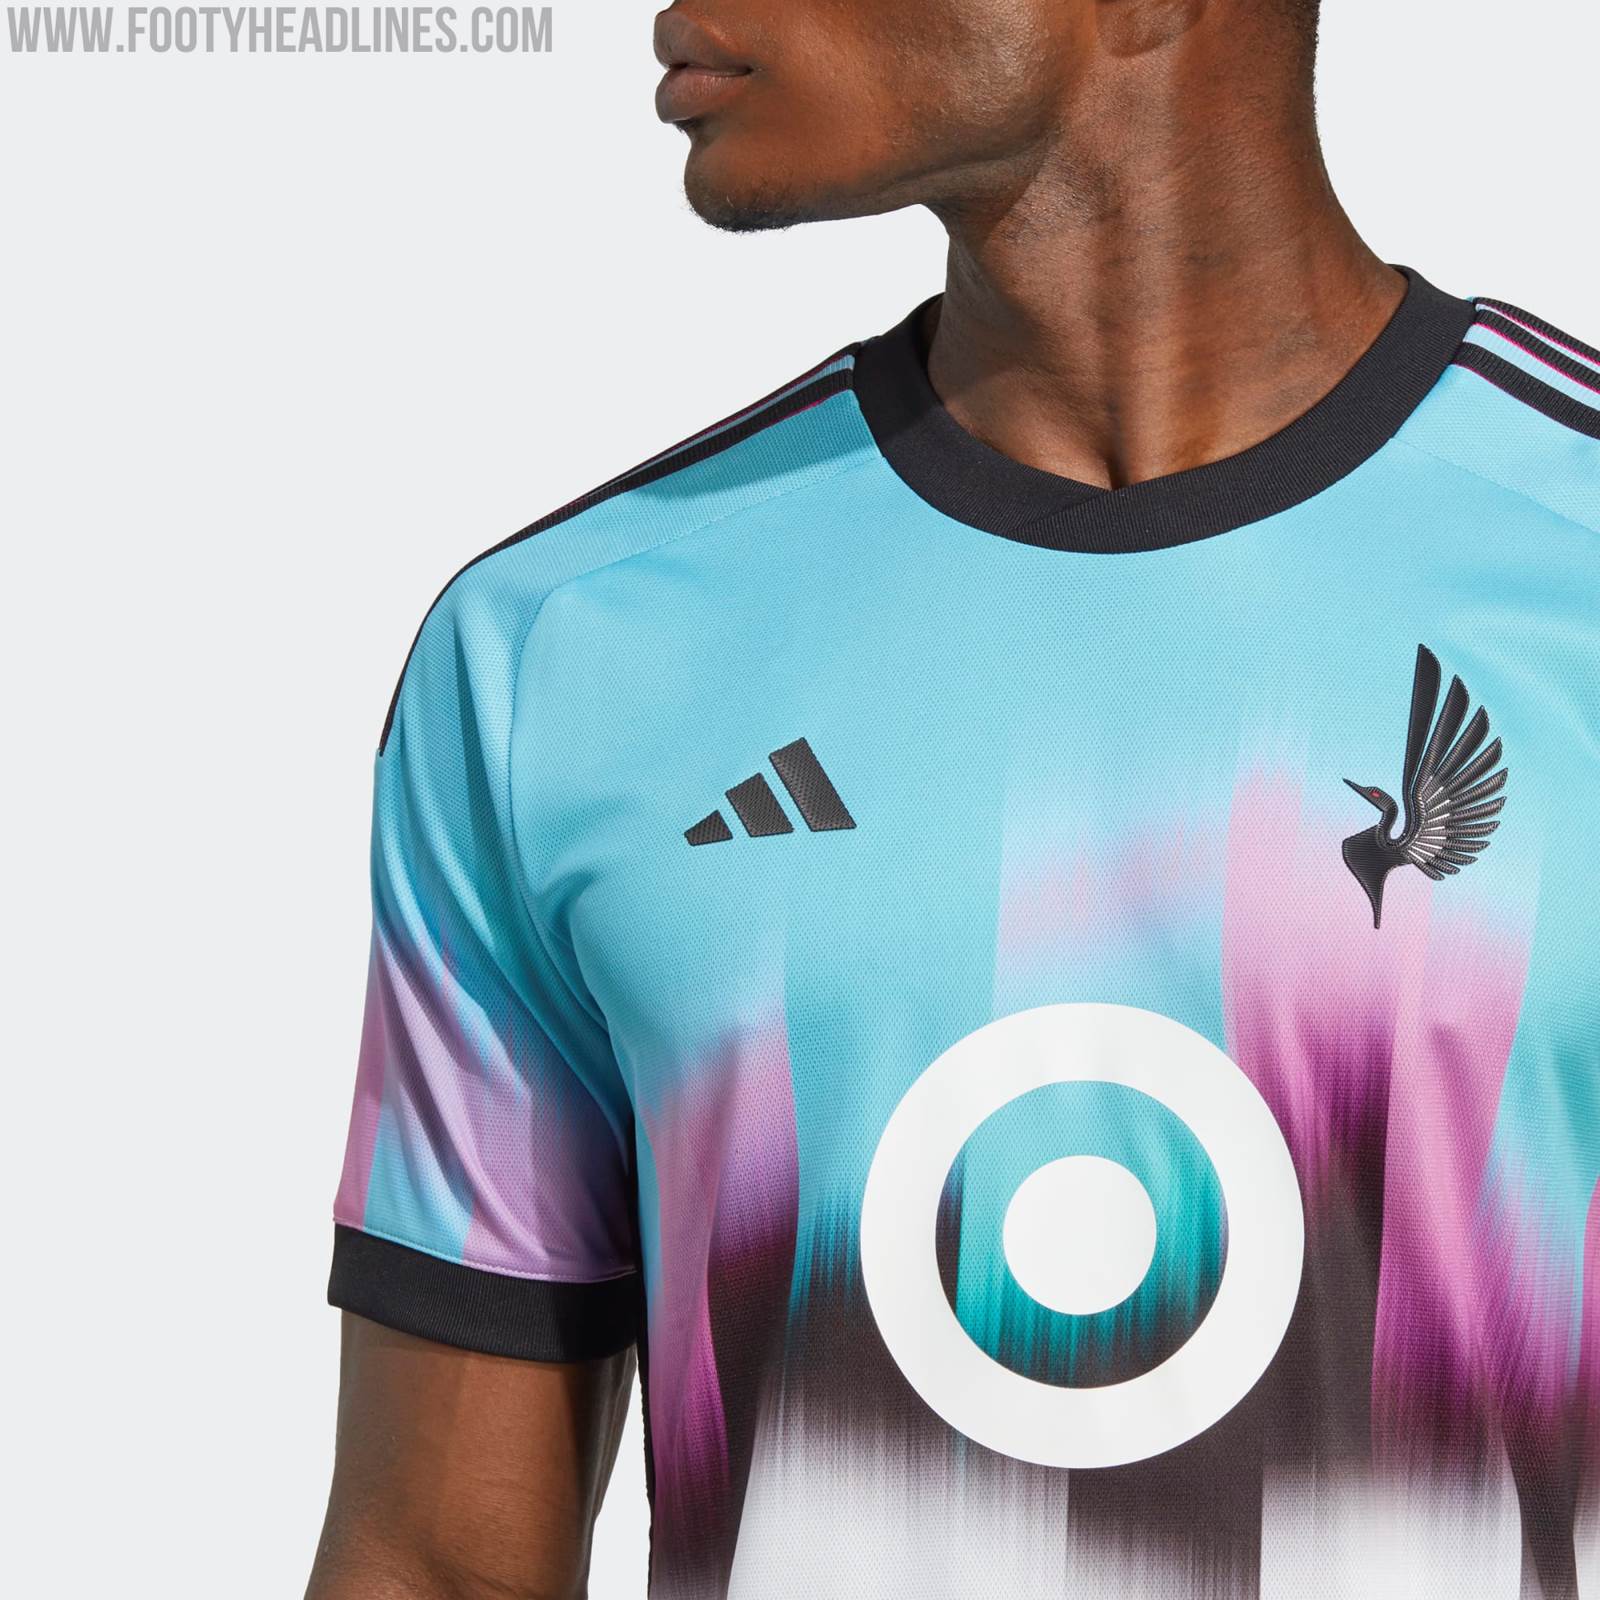 Northland Soccer Journal  Shining Bright: “Northern Lights” 23/24 Away Kit  Launches